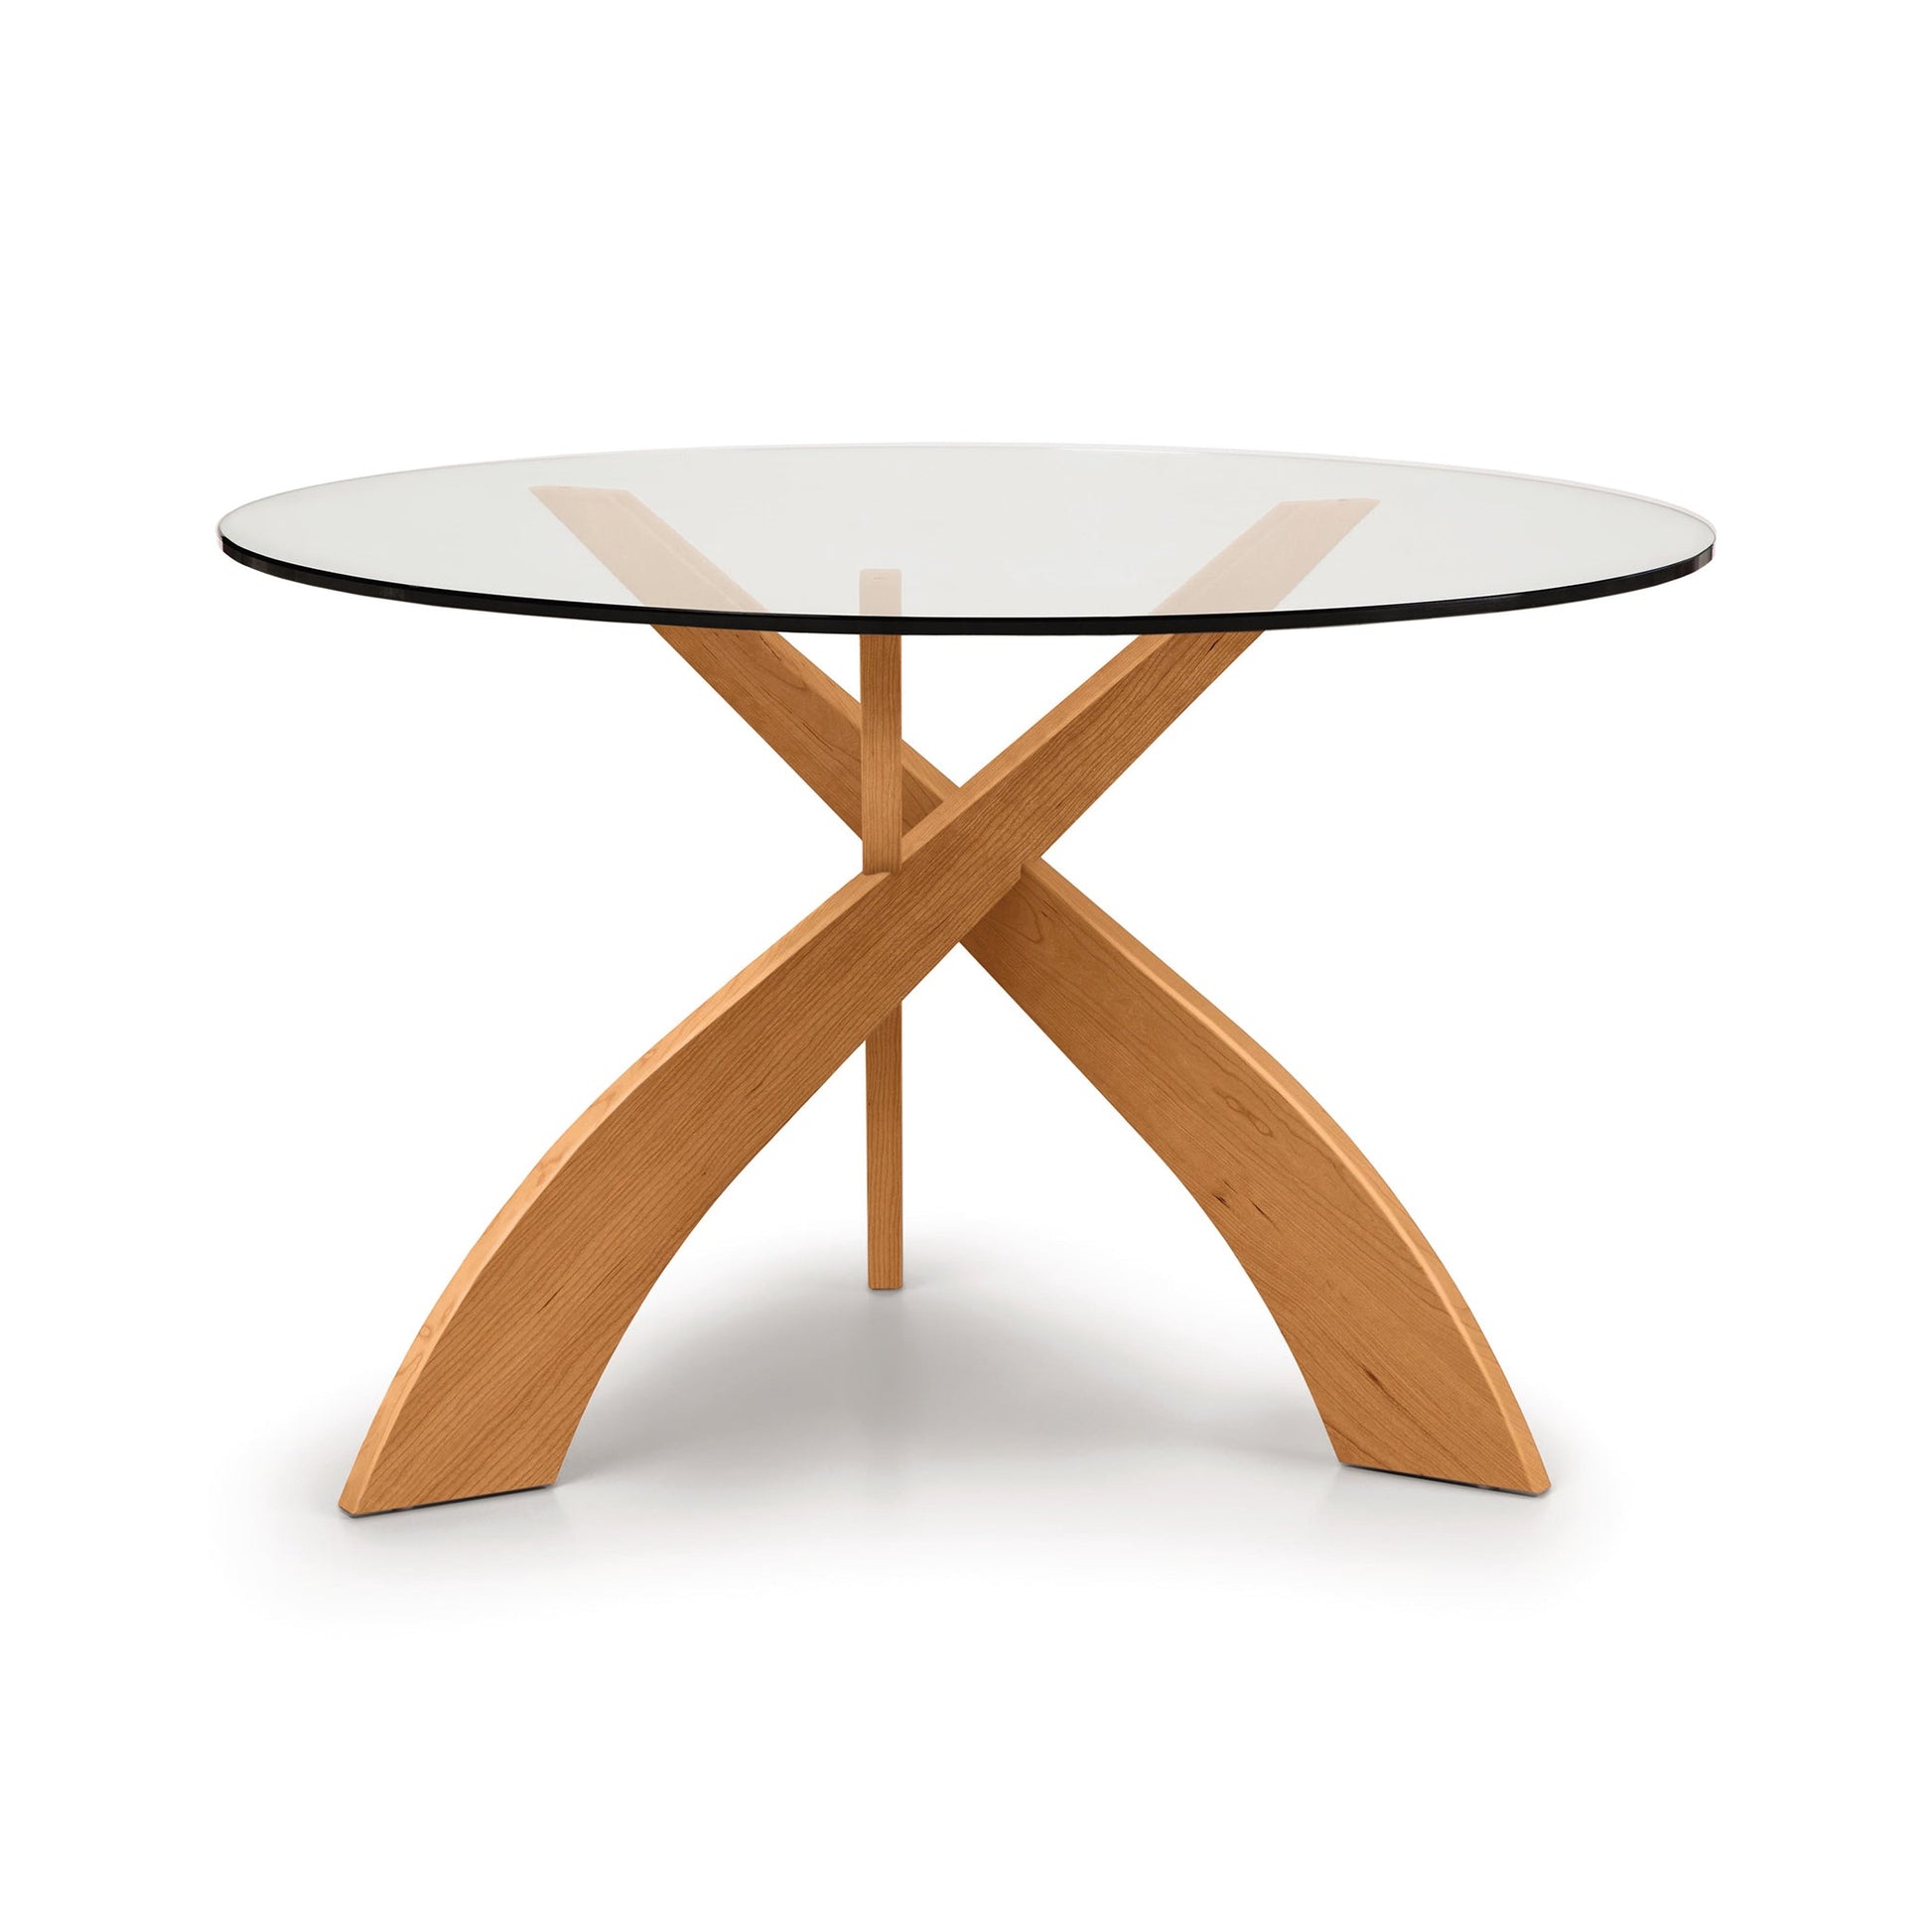 A dining table with a glass top and wooden legs.